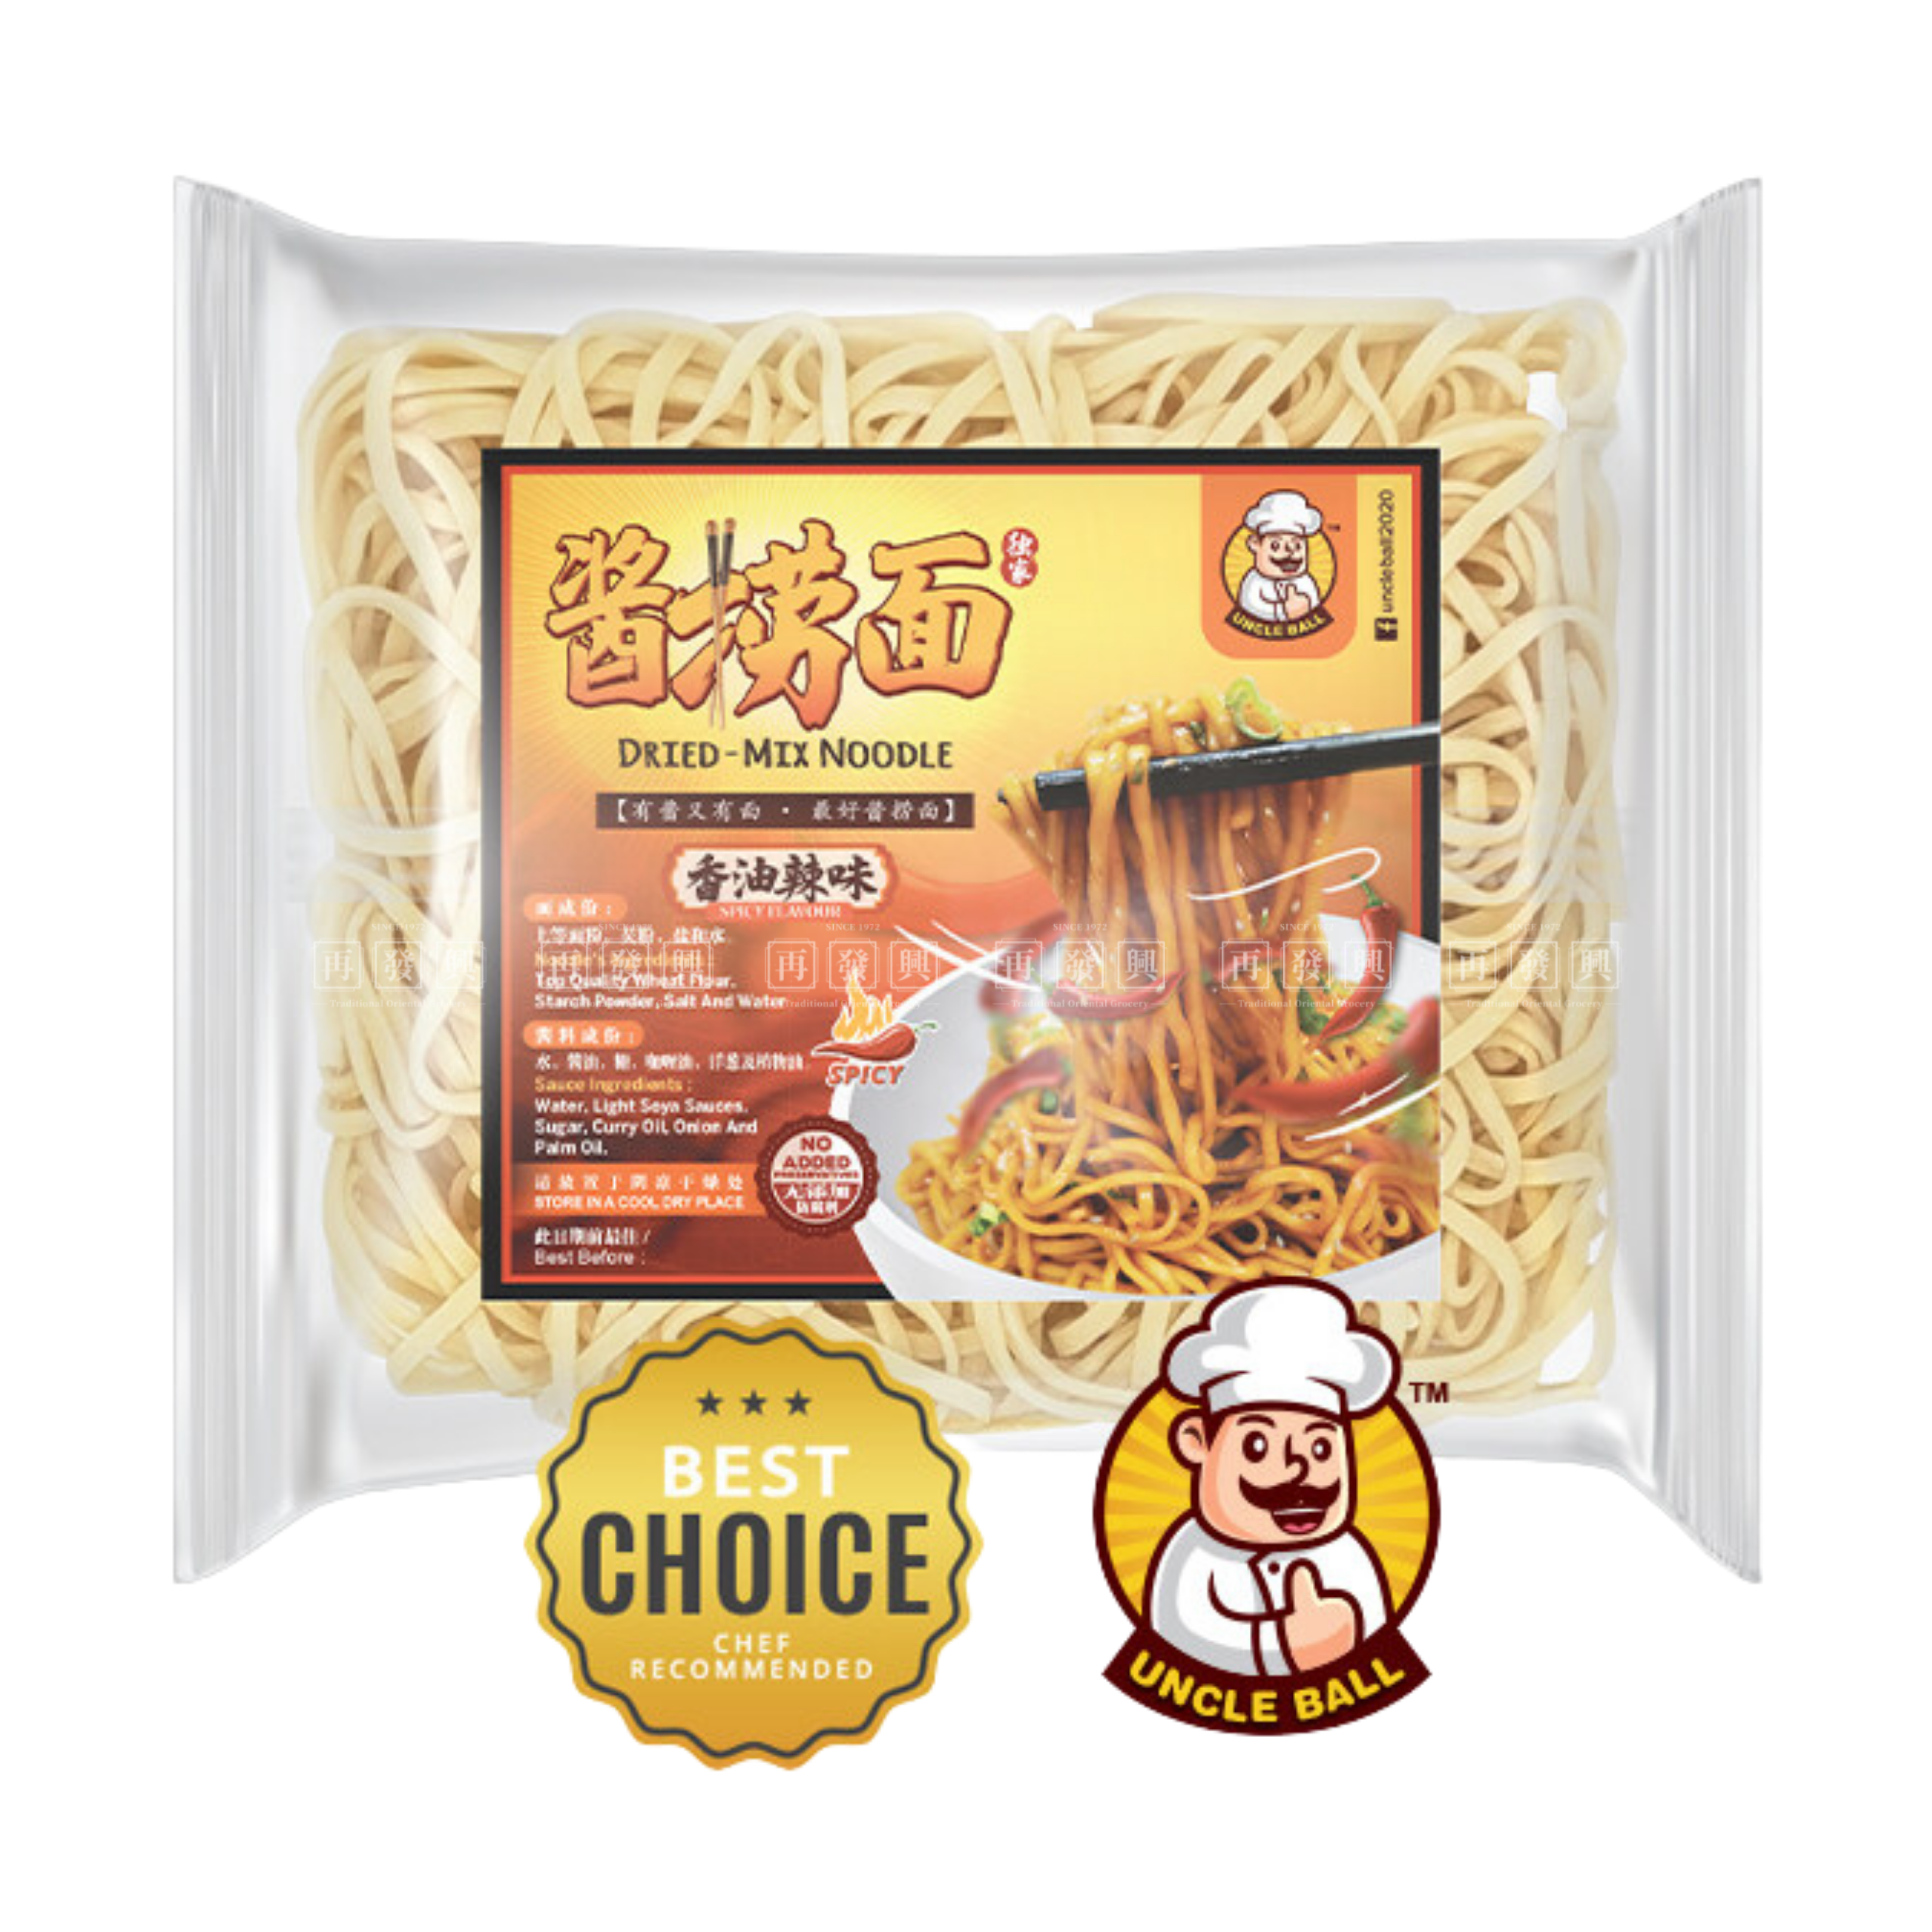 Uncle Ball Dried Mix Noodle with (Spicy Flavour) 球师傅酱捞面(香油辣味) 5pkt